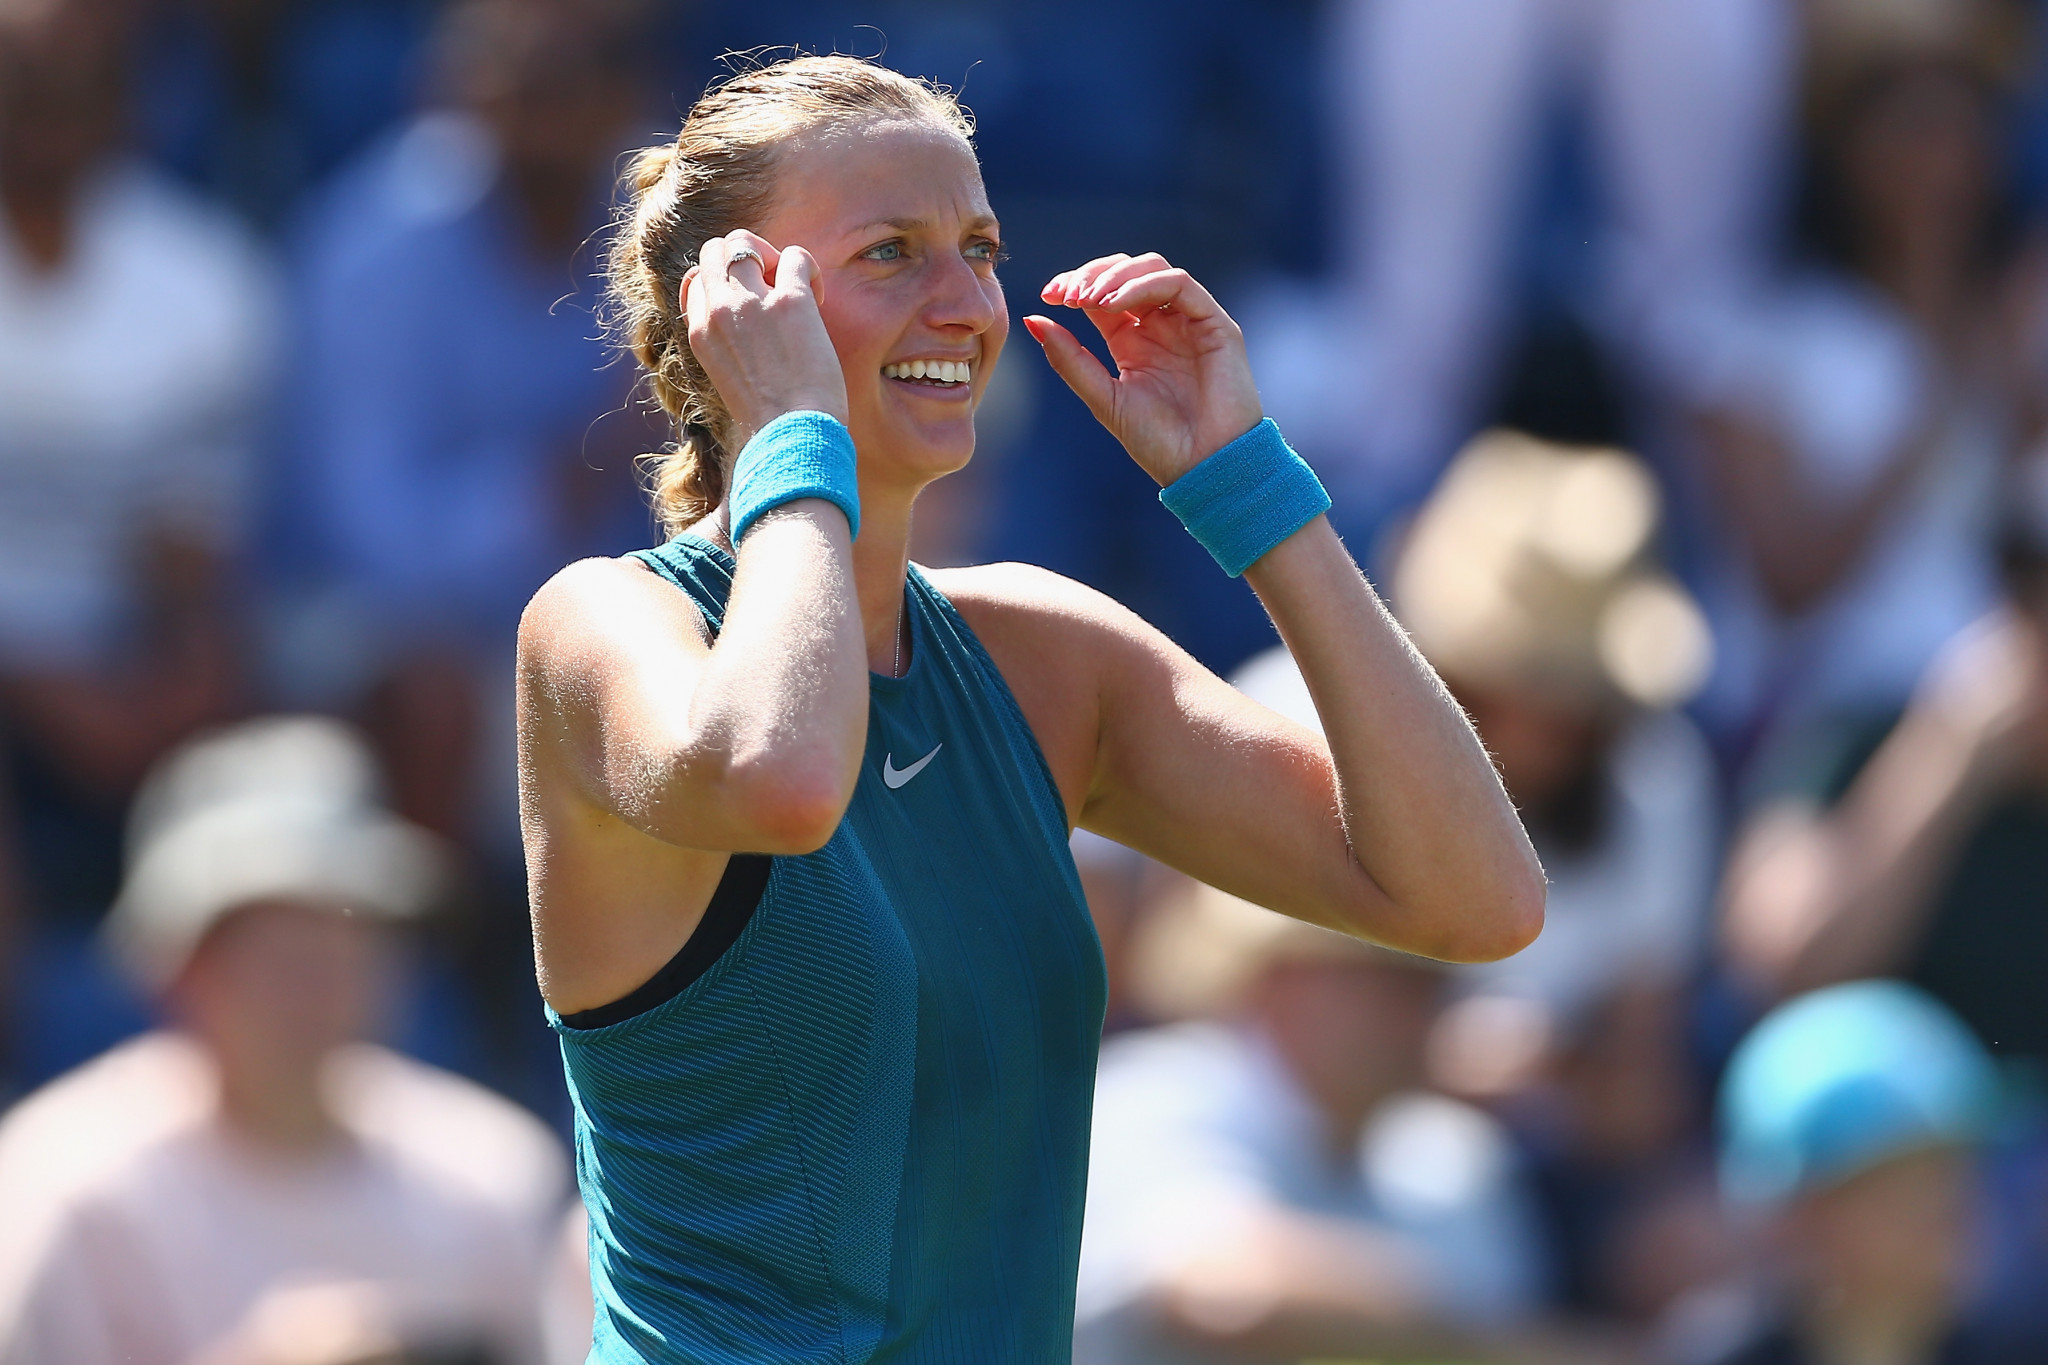 Petra Kvitová of the Czech Republic maintained her fine run of form as the two-time Wimbledon champion dispatched Kateryna Bondarenko of Ukraine to reach the third round ©Getty Images